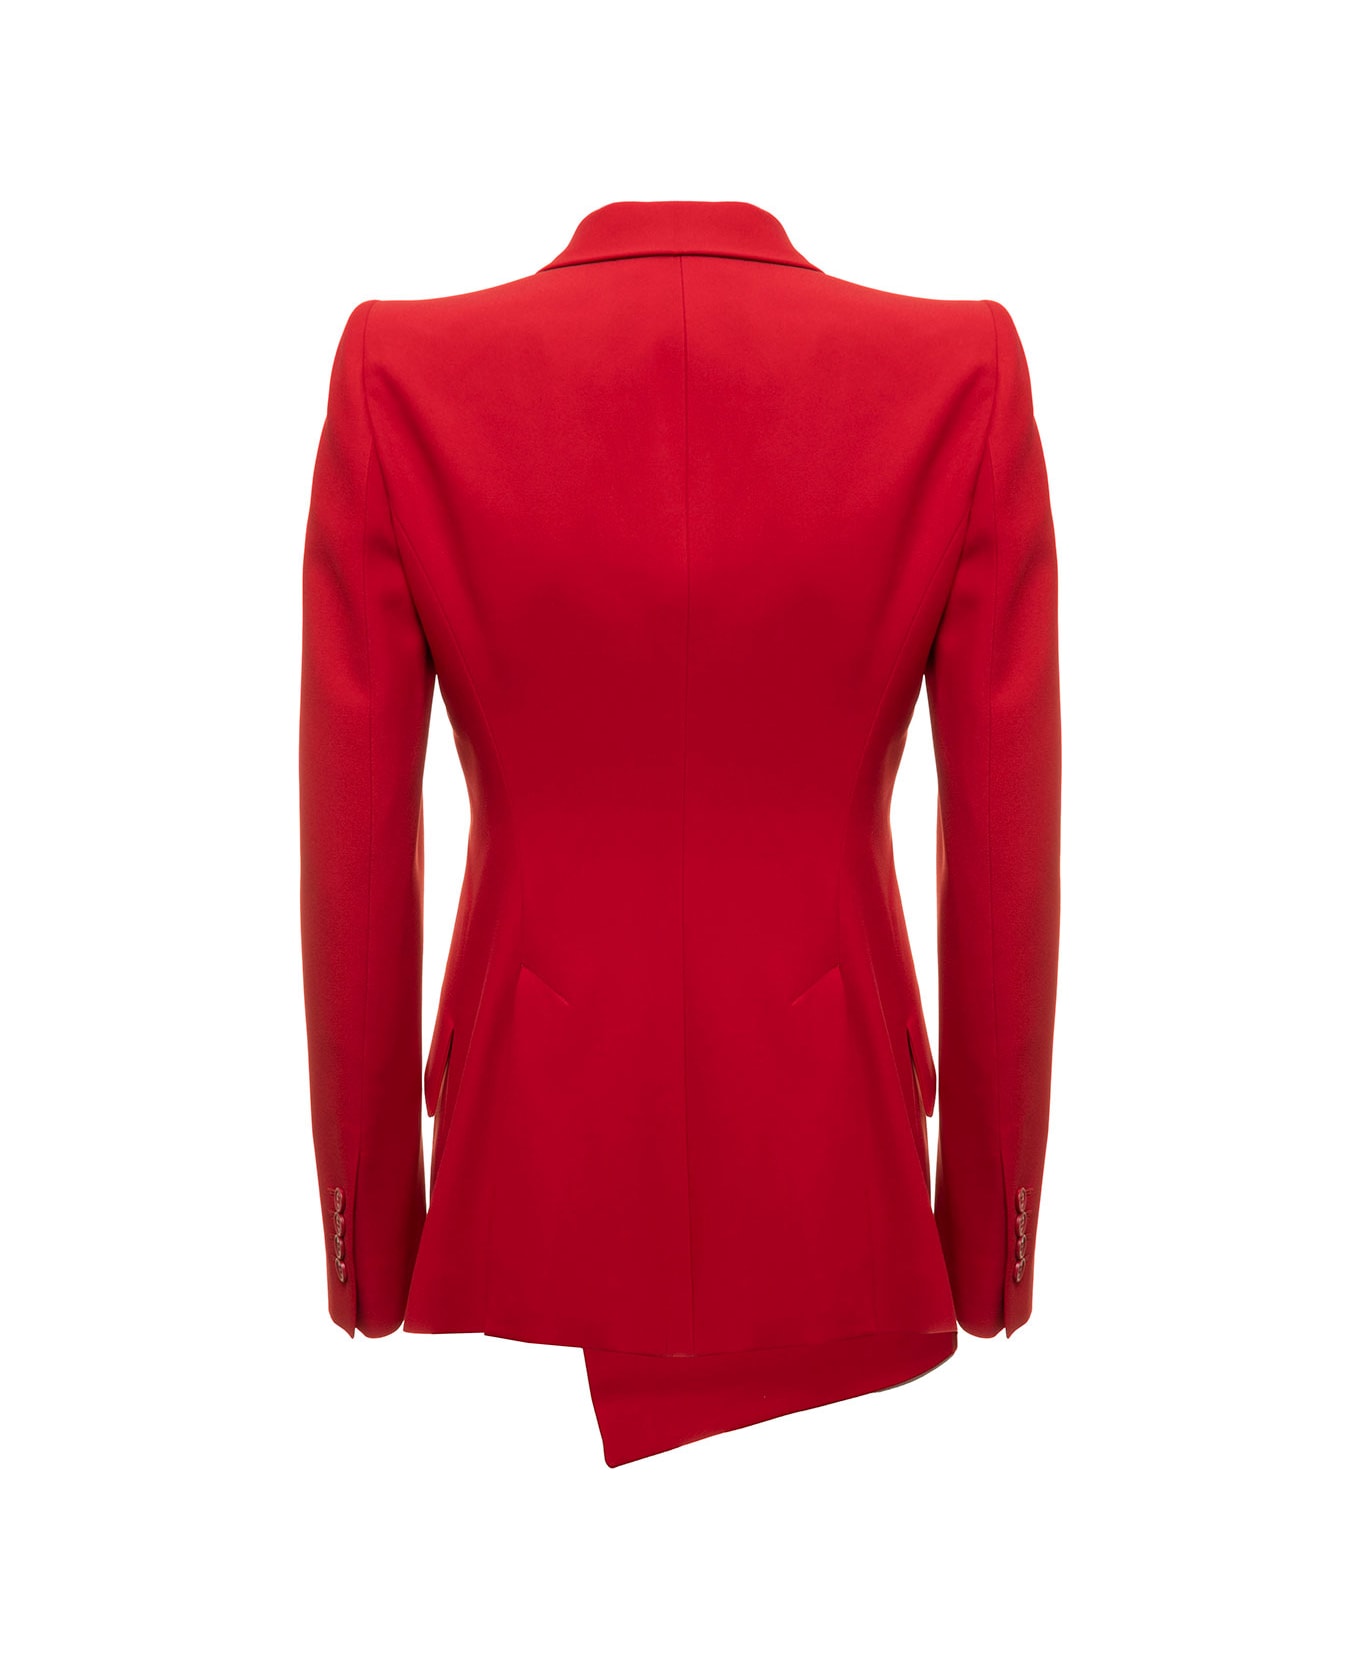 Alexander McQueen Asymmetrical Double-breasted  Red Wool  Jacket Alexander Mcqueen Woman - Red